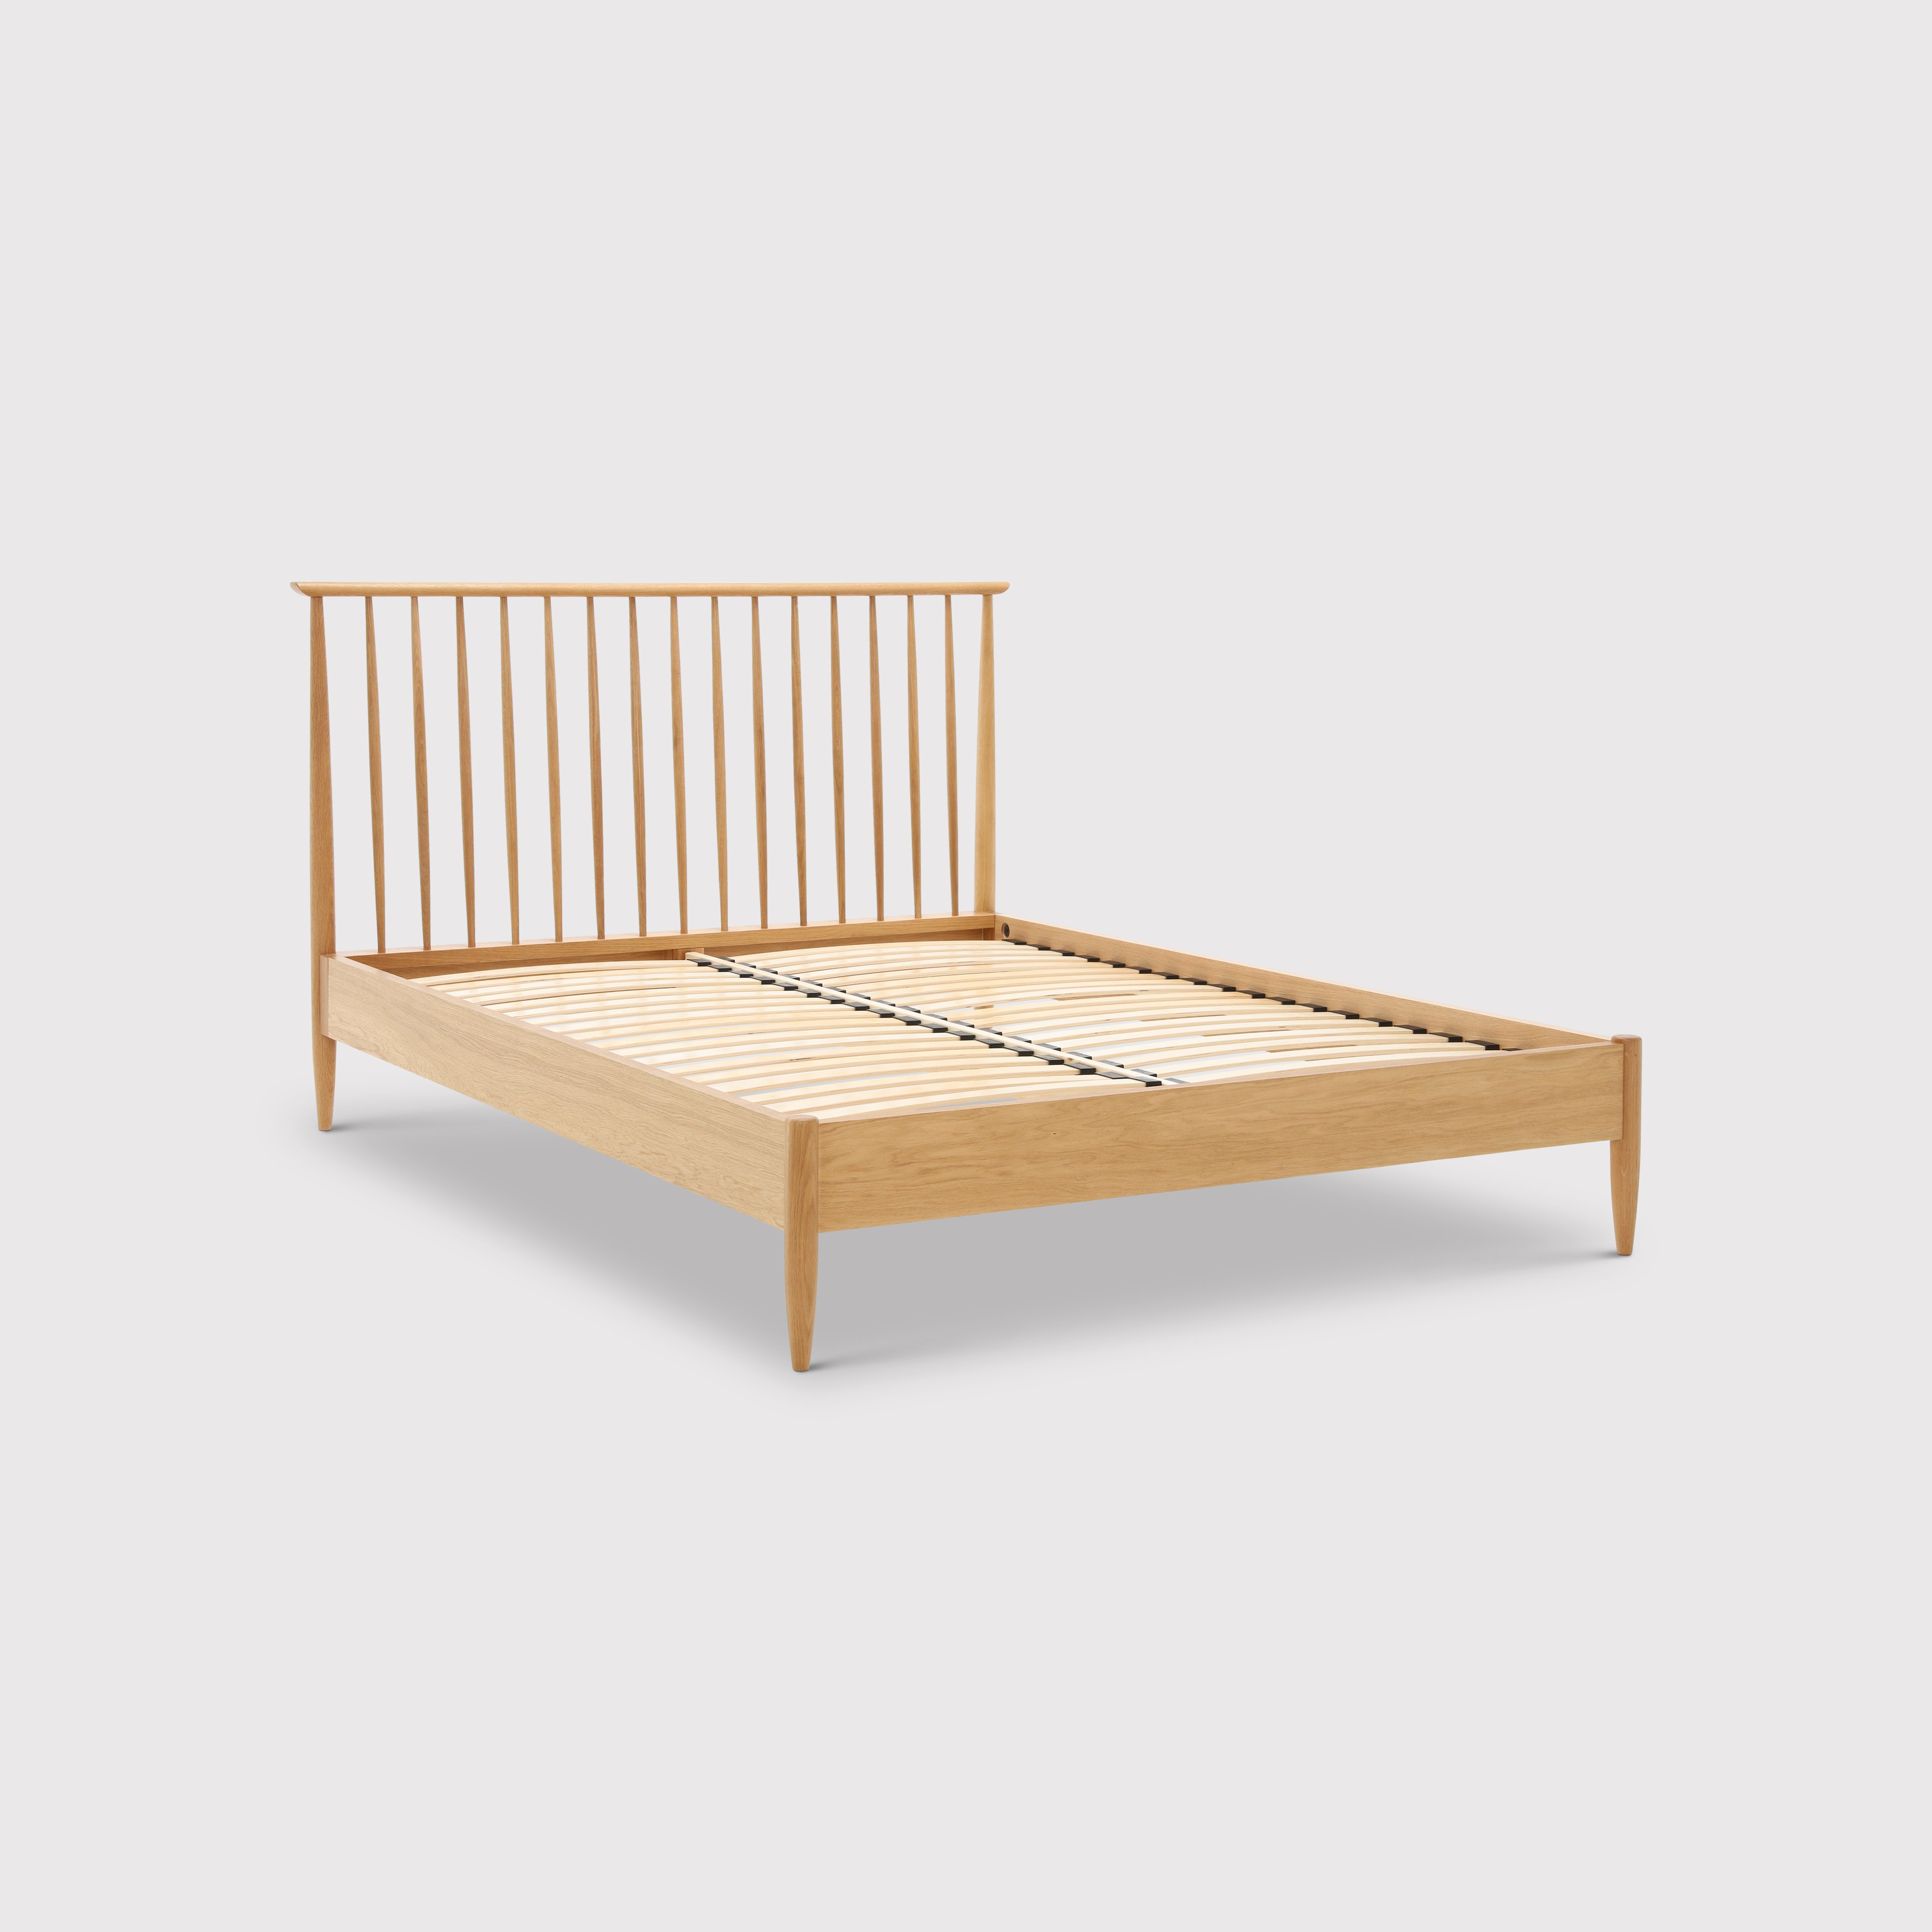 Ercol Teramo Double Bed, Neutral Wood | Barker & Stonehouse